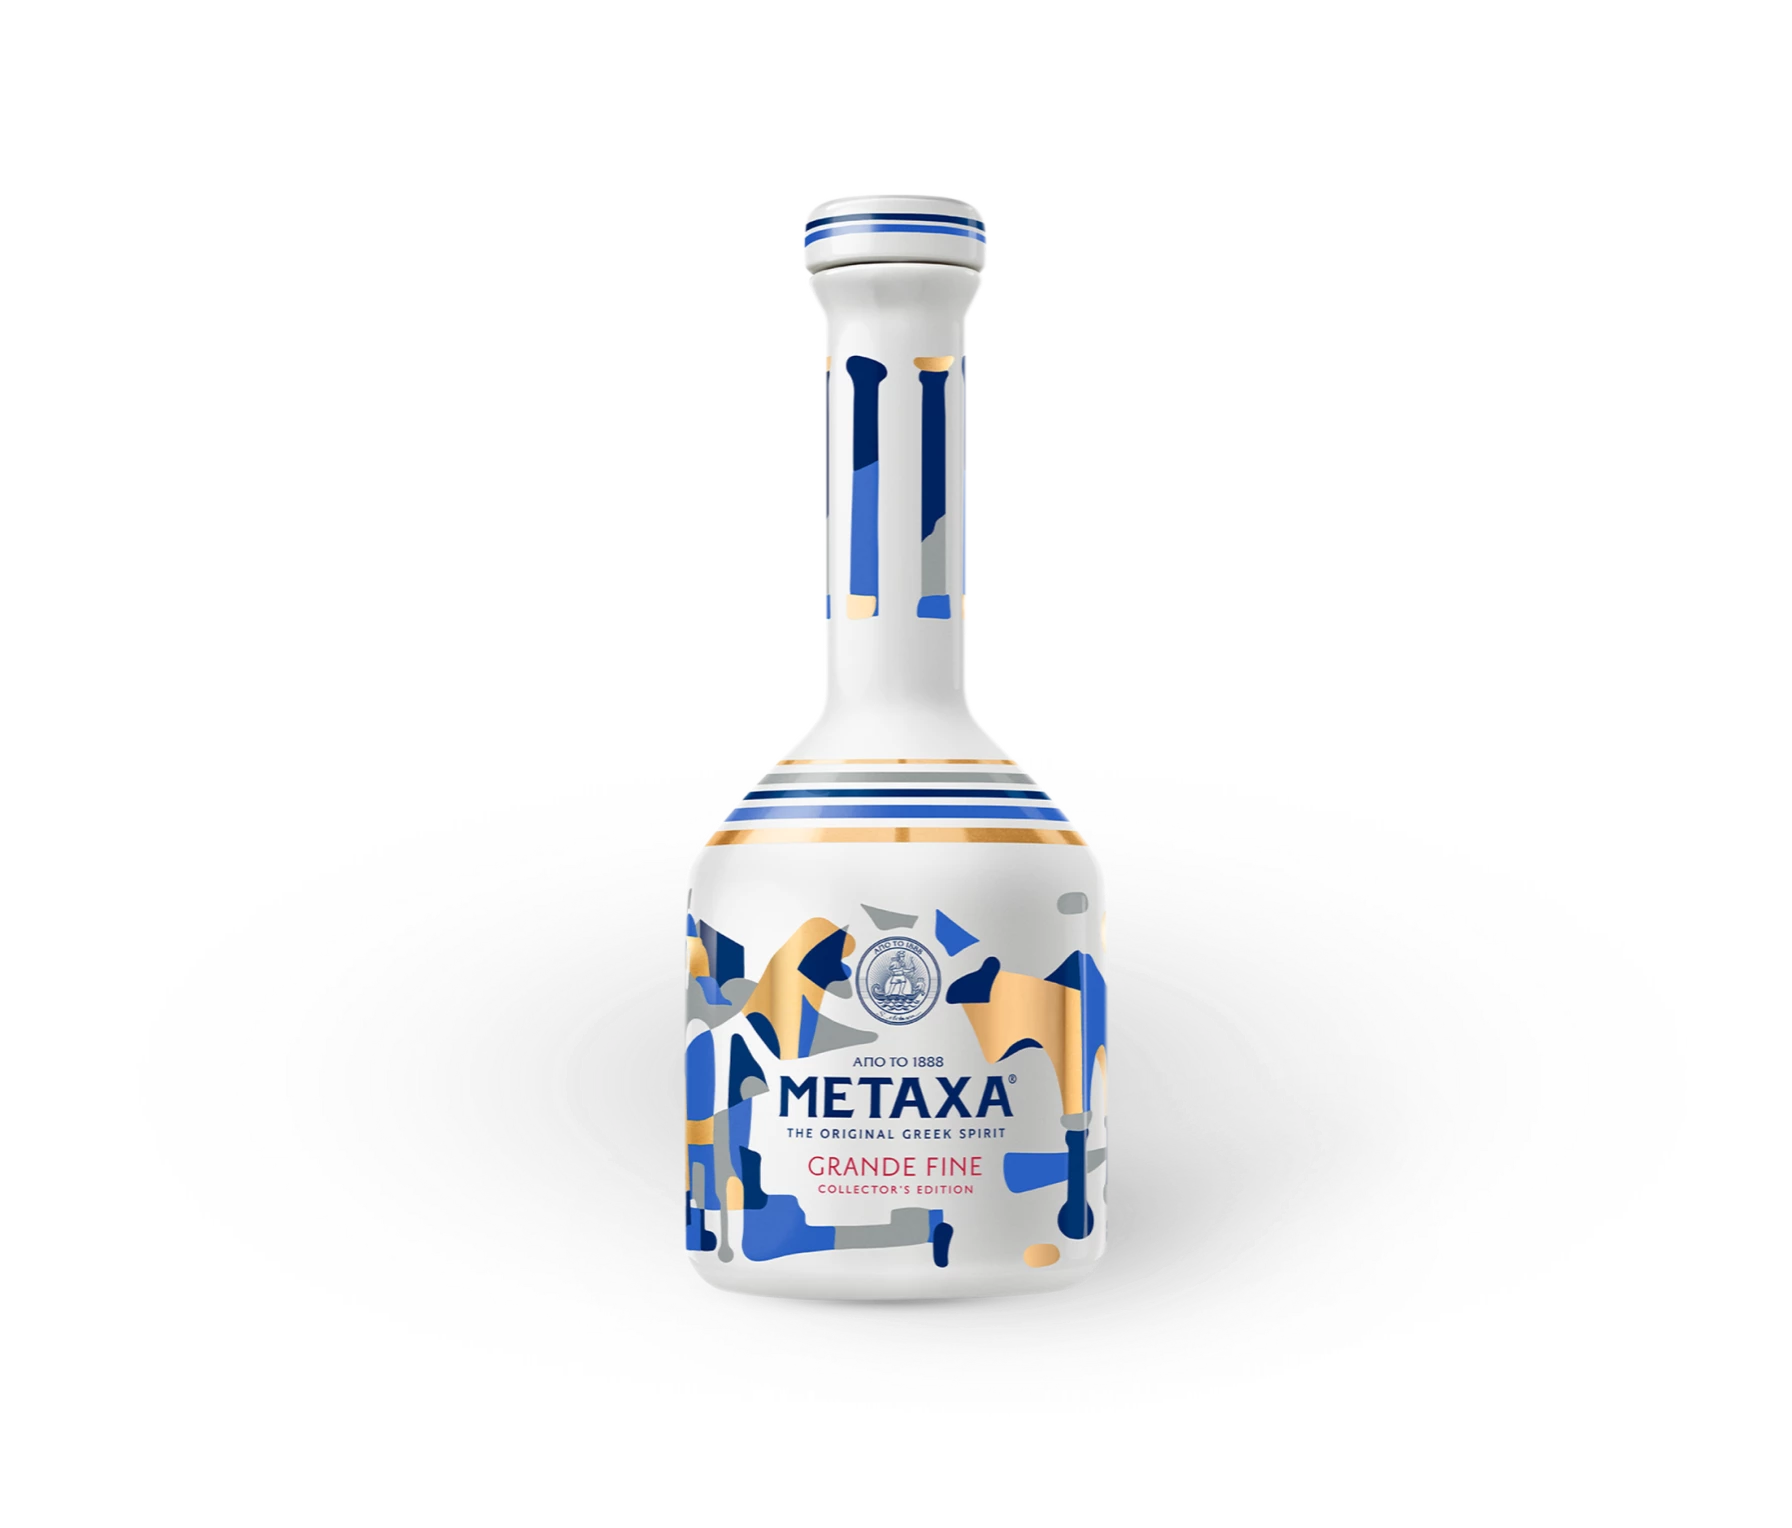 METAXA 12 dried fruit with spicy Stars - notes